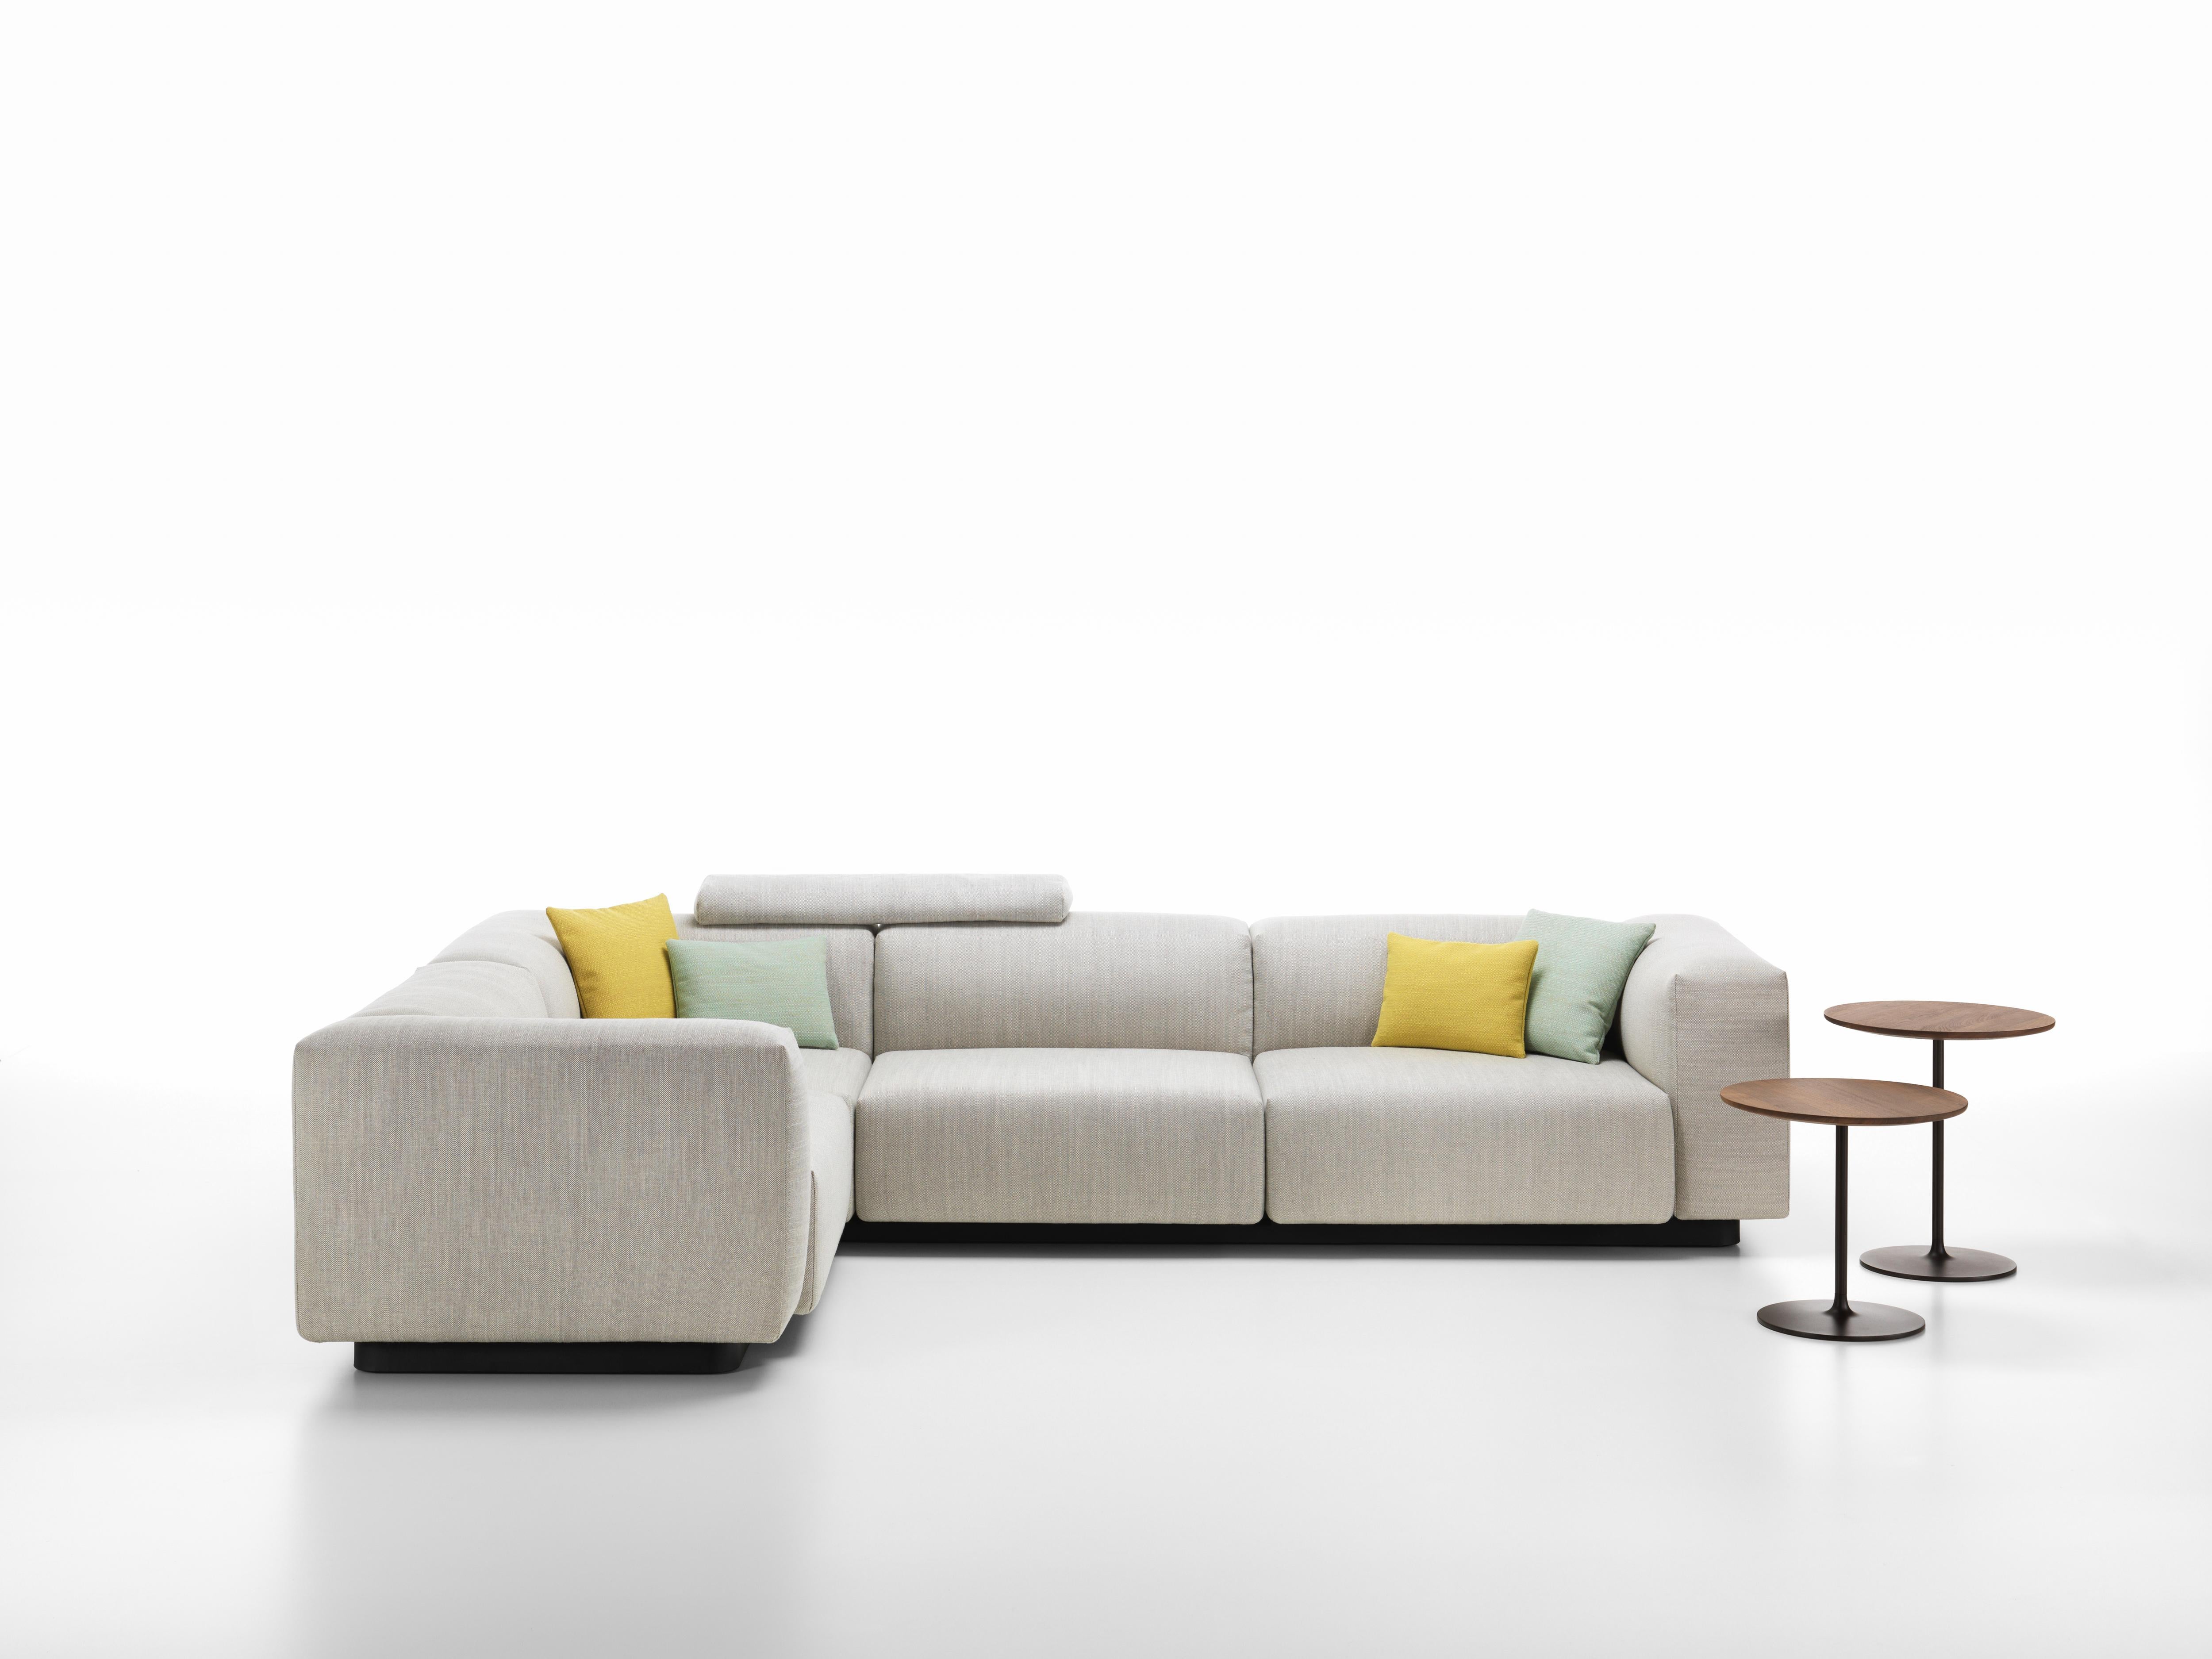 These items are only available in the United States.

The soft modular sofa is Jasper Morrison‘s updated interpretation of what has become a modern classic: The low-slung modular sofa with a decidedly horizontal emphasis. Uniting carefully